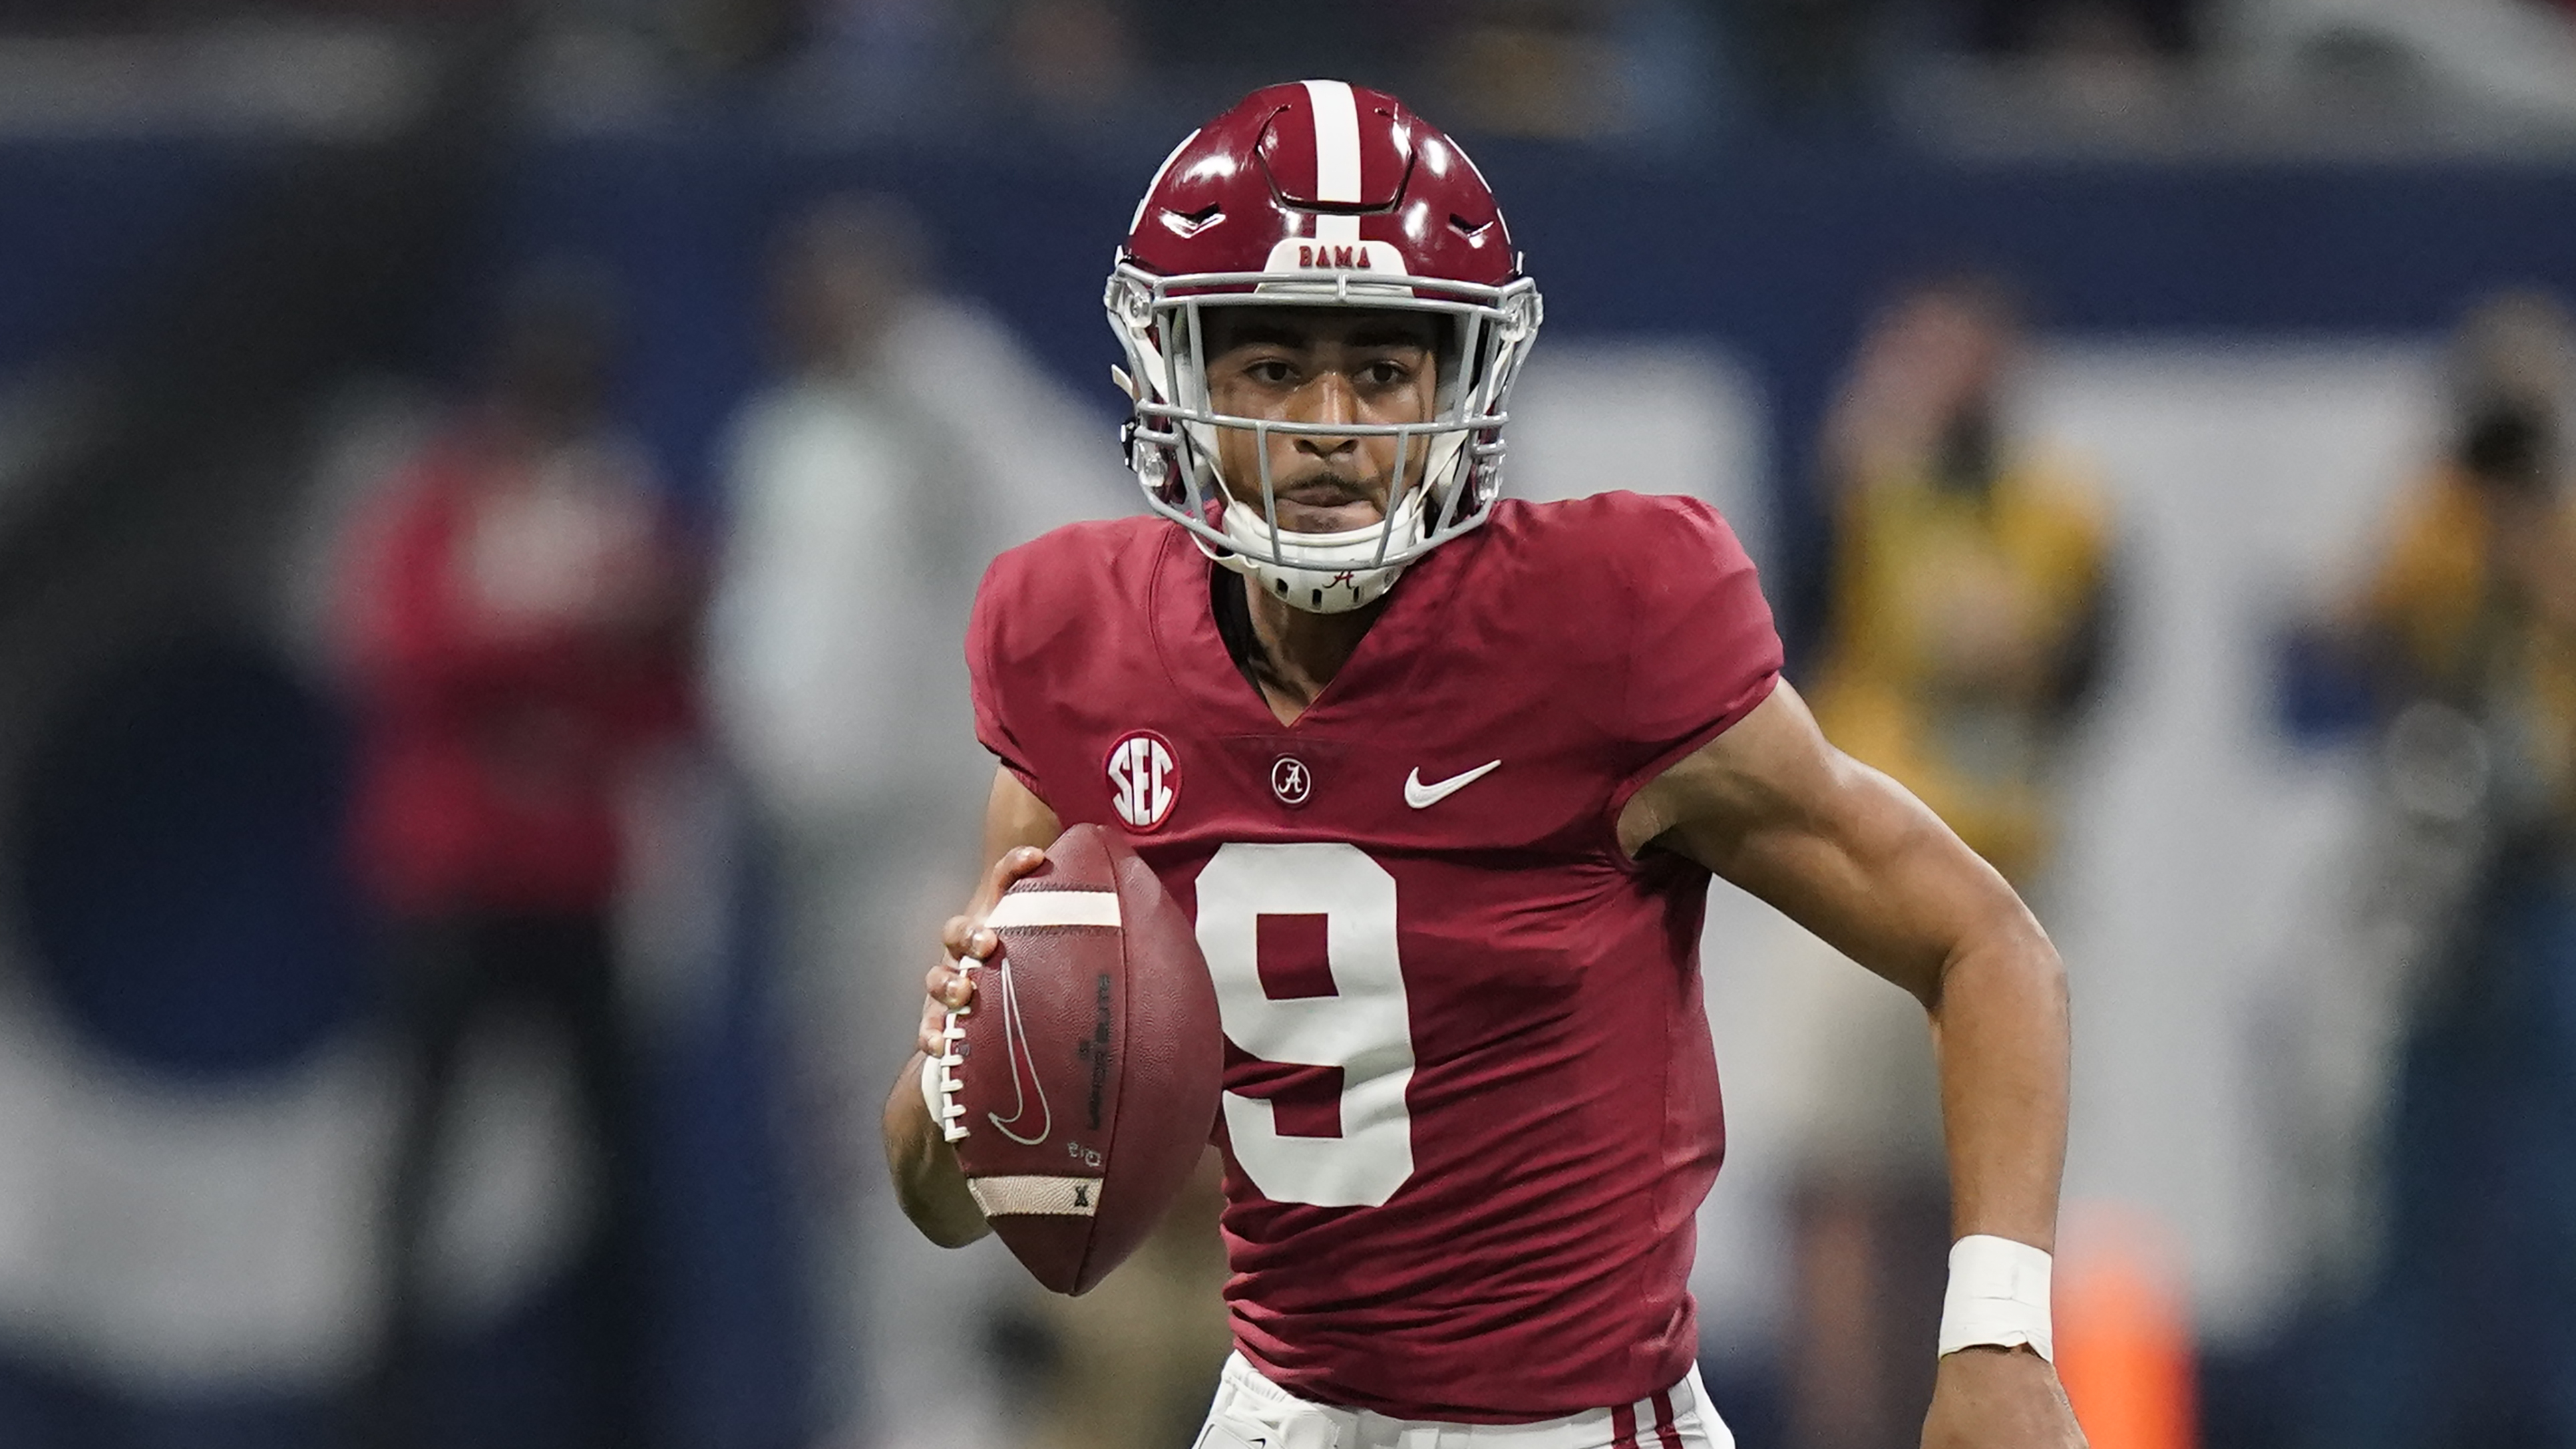 Alabama's Bryce Young Wins 2021 AP College Football Player of the Year Award